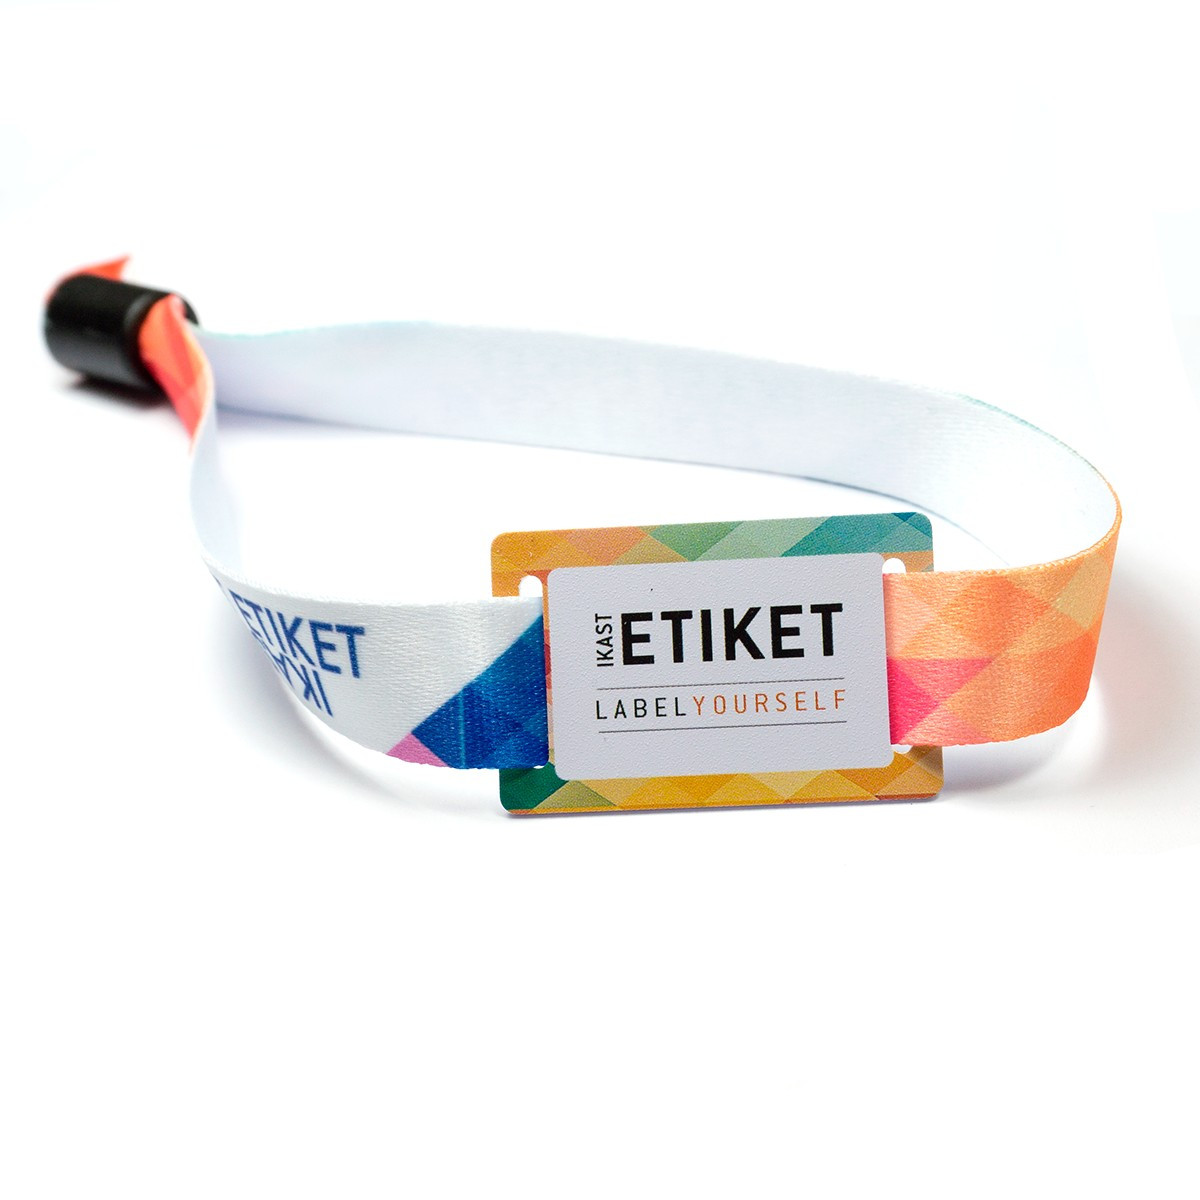 Customisable RFID wristbands for events | PDC